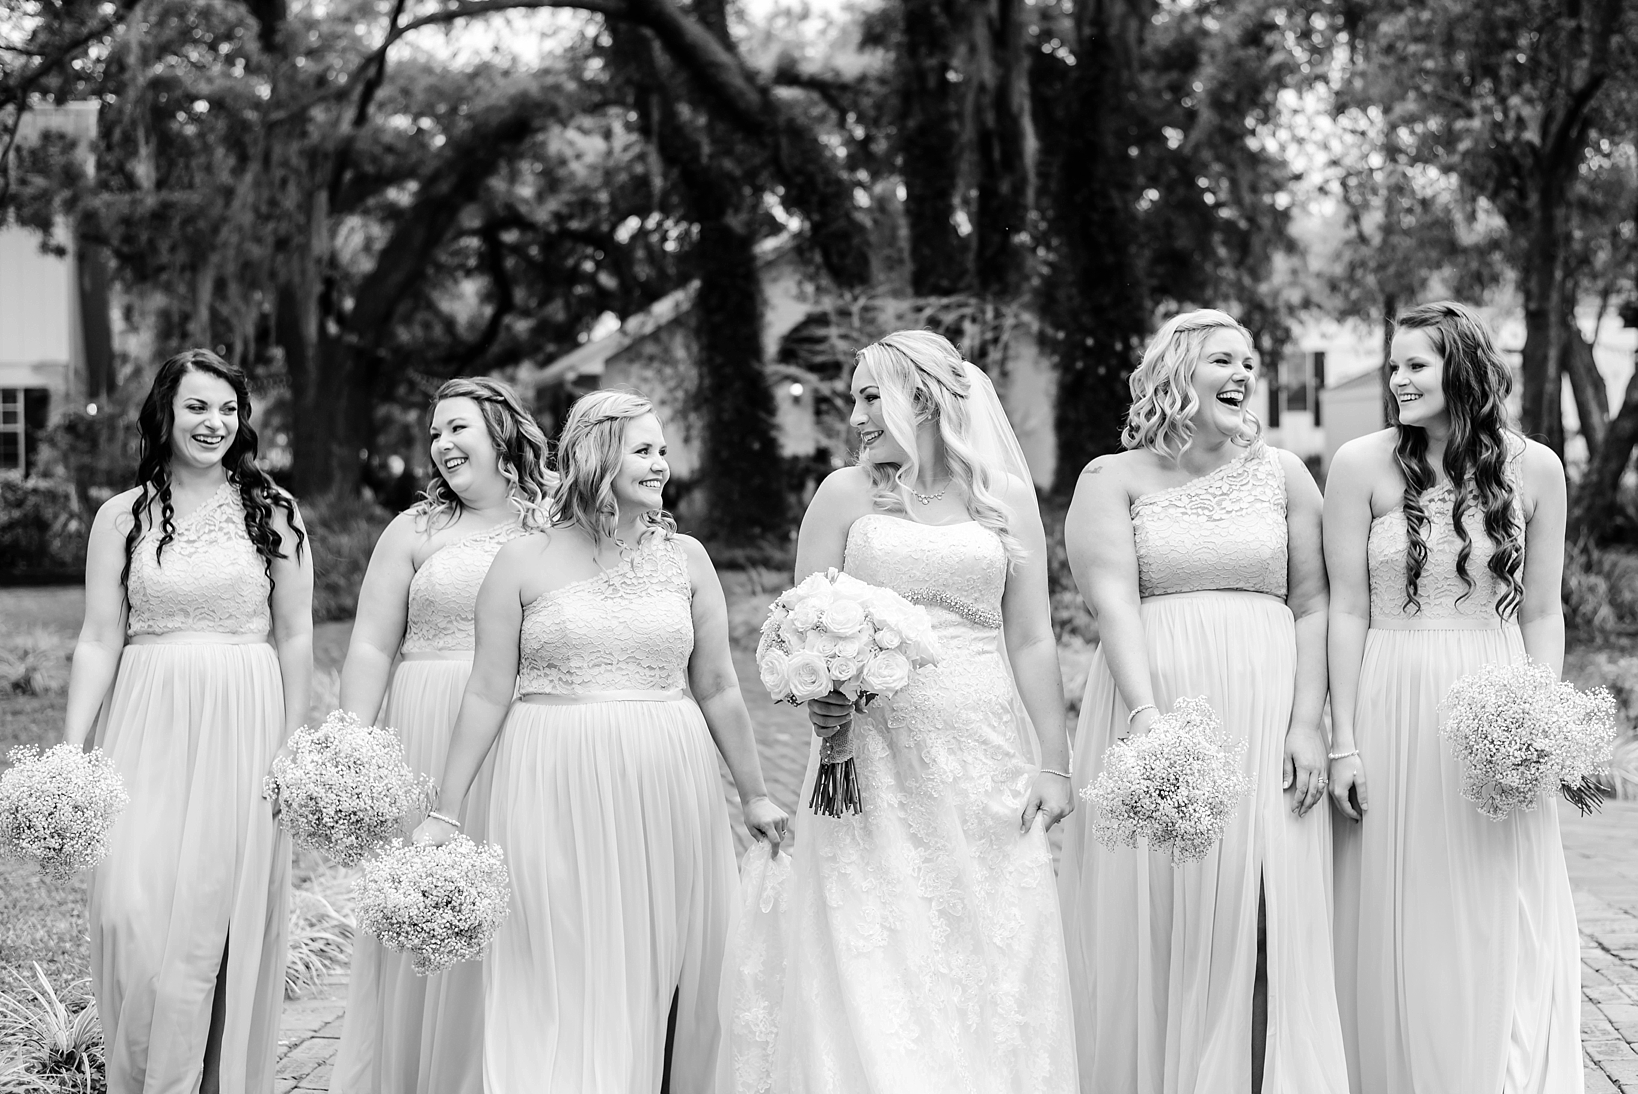 Bride and her bridesmaids laughing in black and white